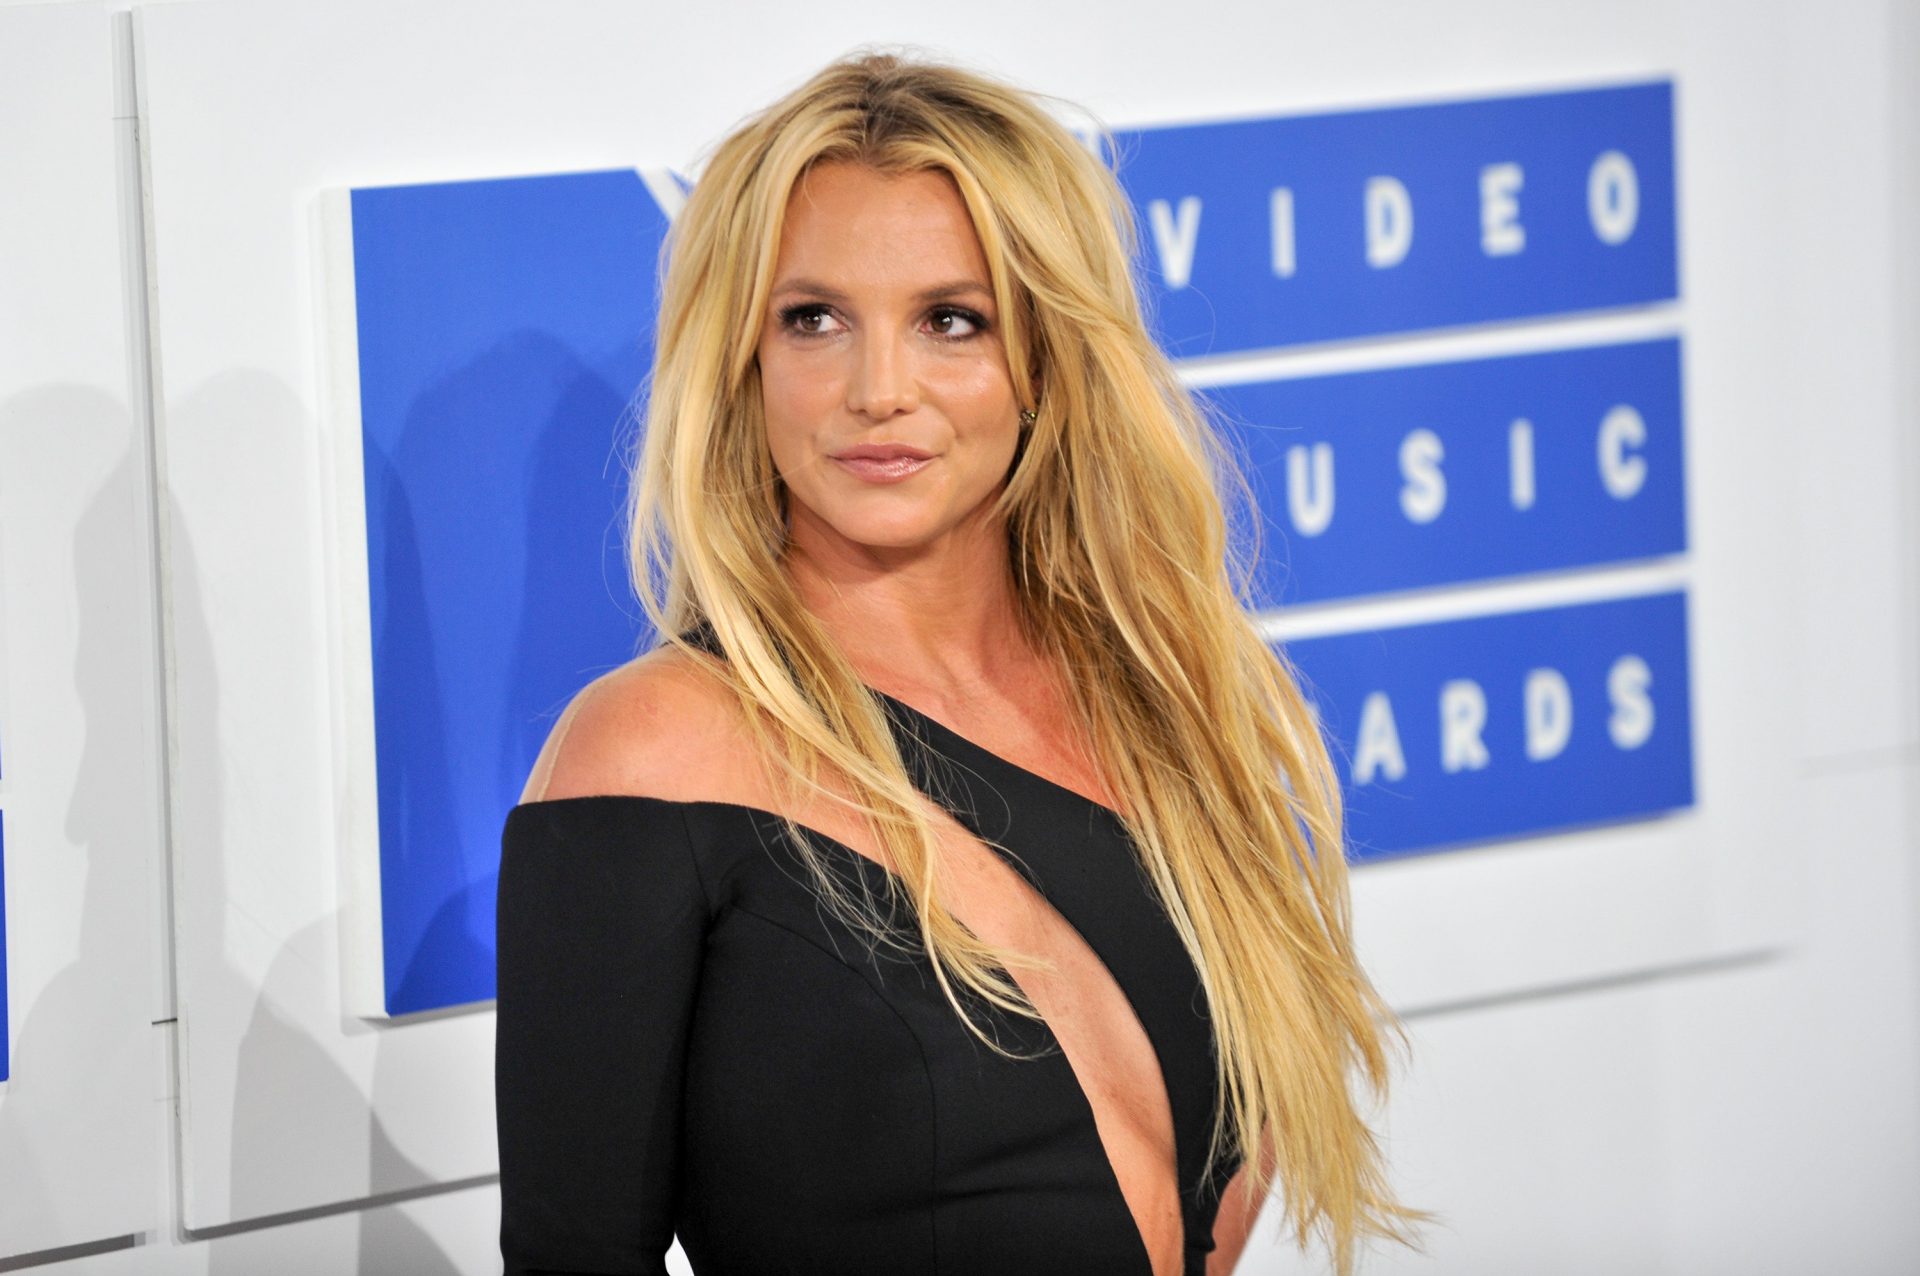 Britney Spears Says She’ll Be Posting Less to Instagram Thanks to the ‘Rude’ Media